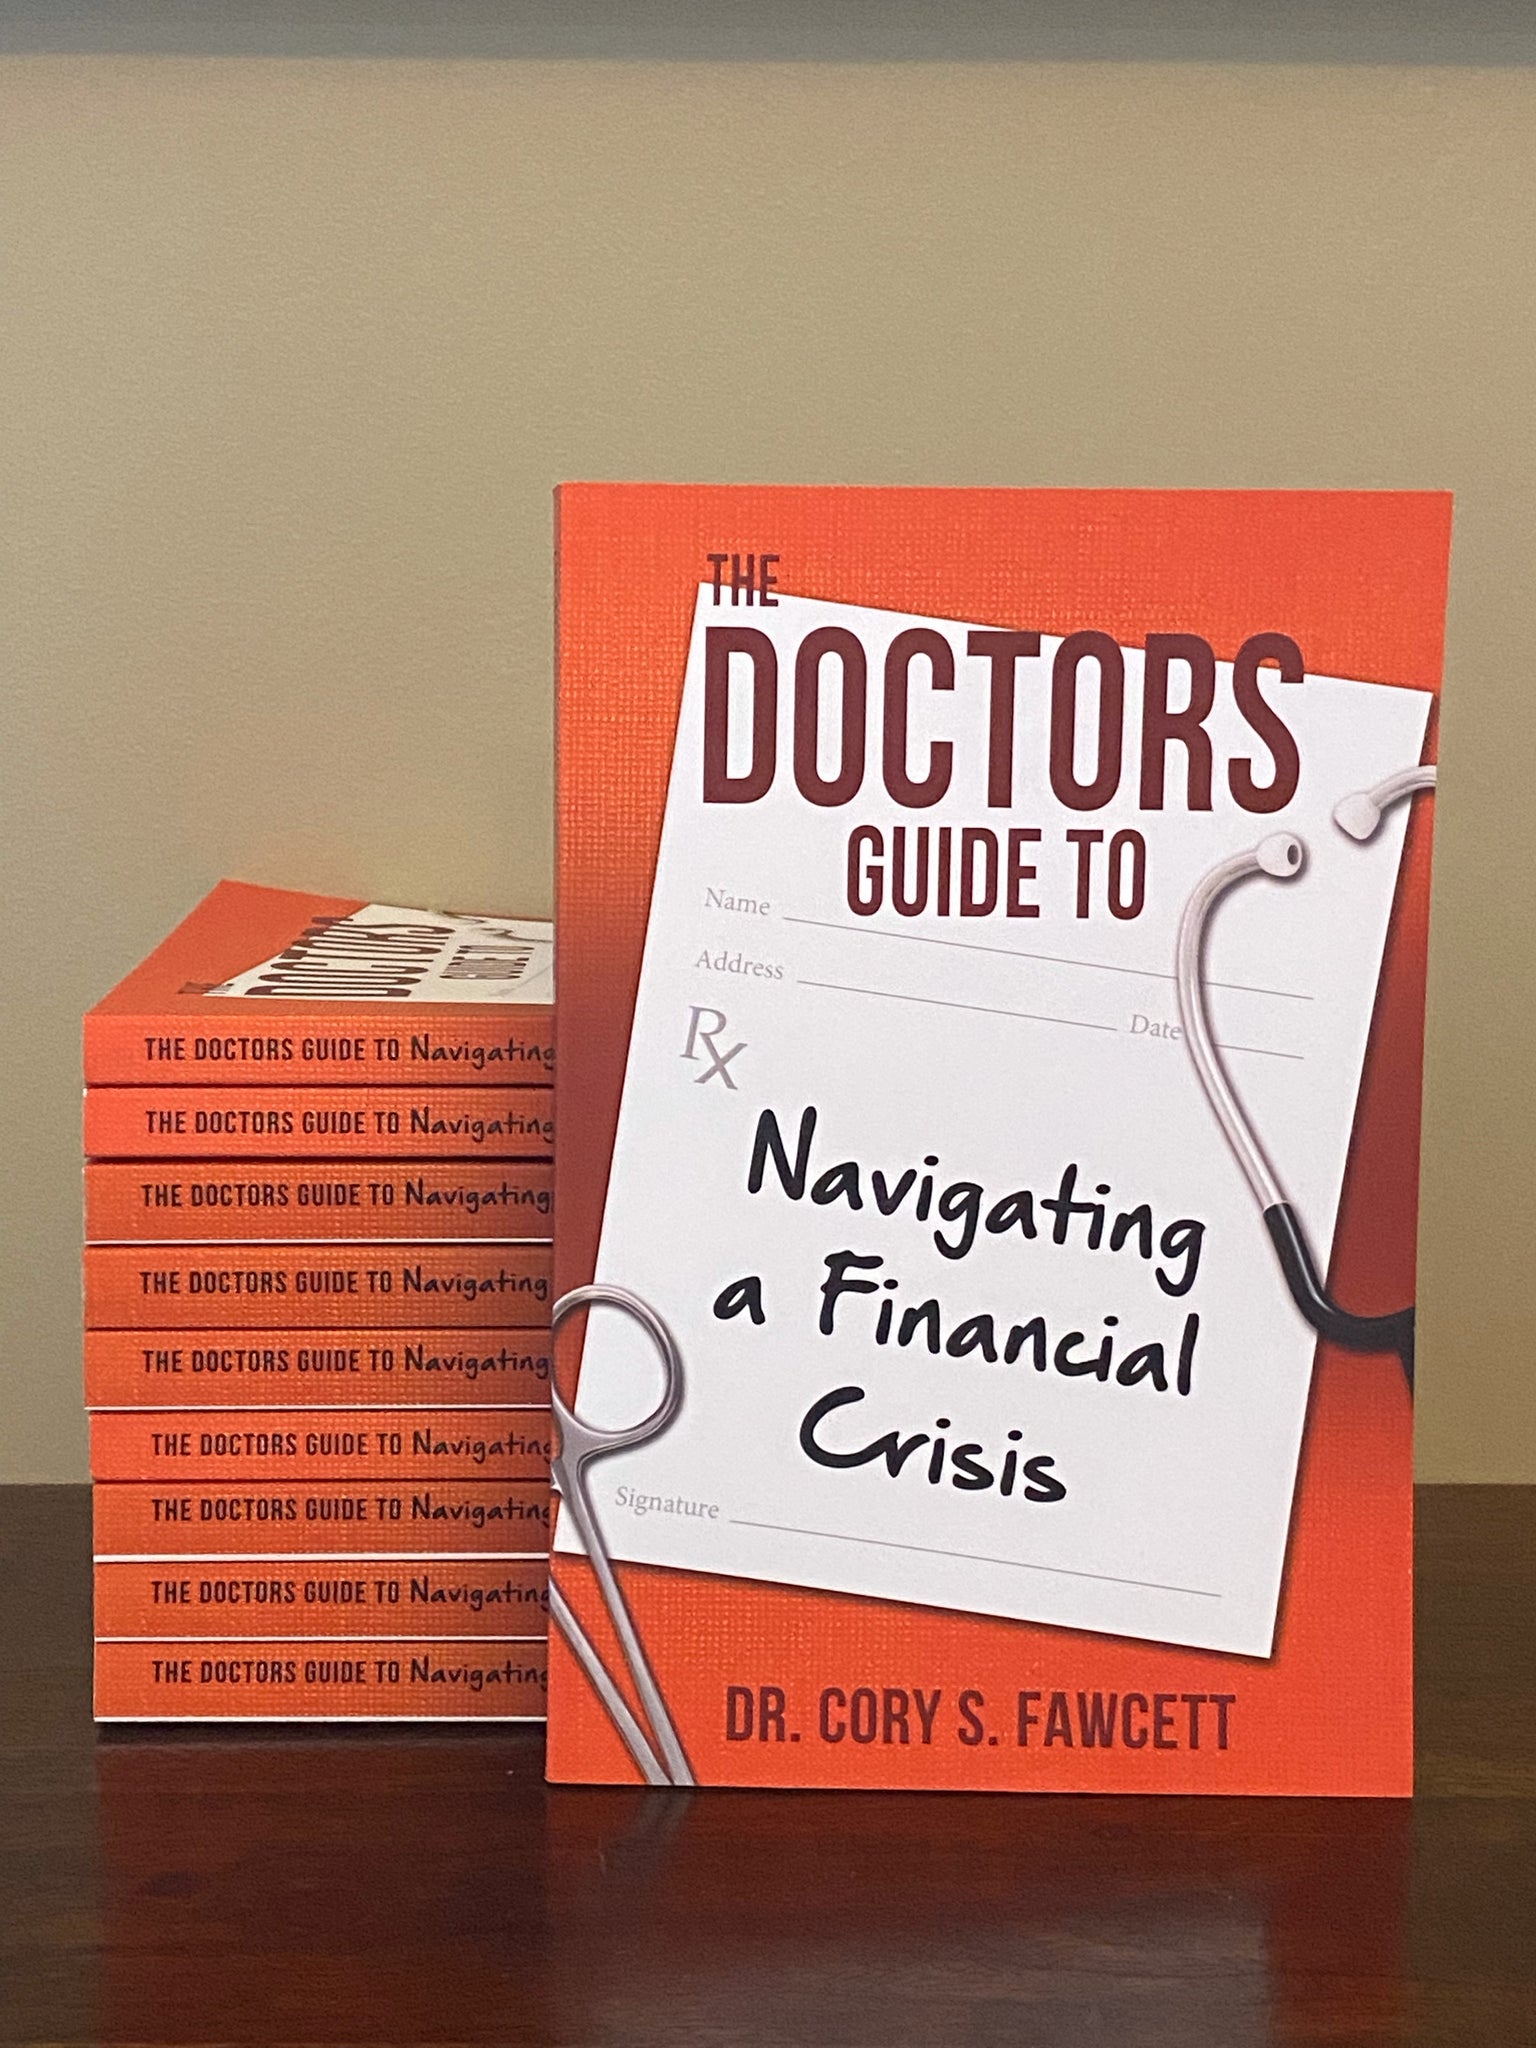 The Doctors Guide to Navigating a Financial Crisis